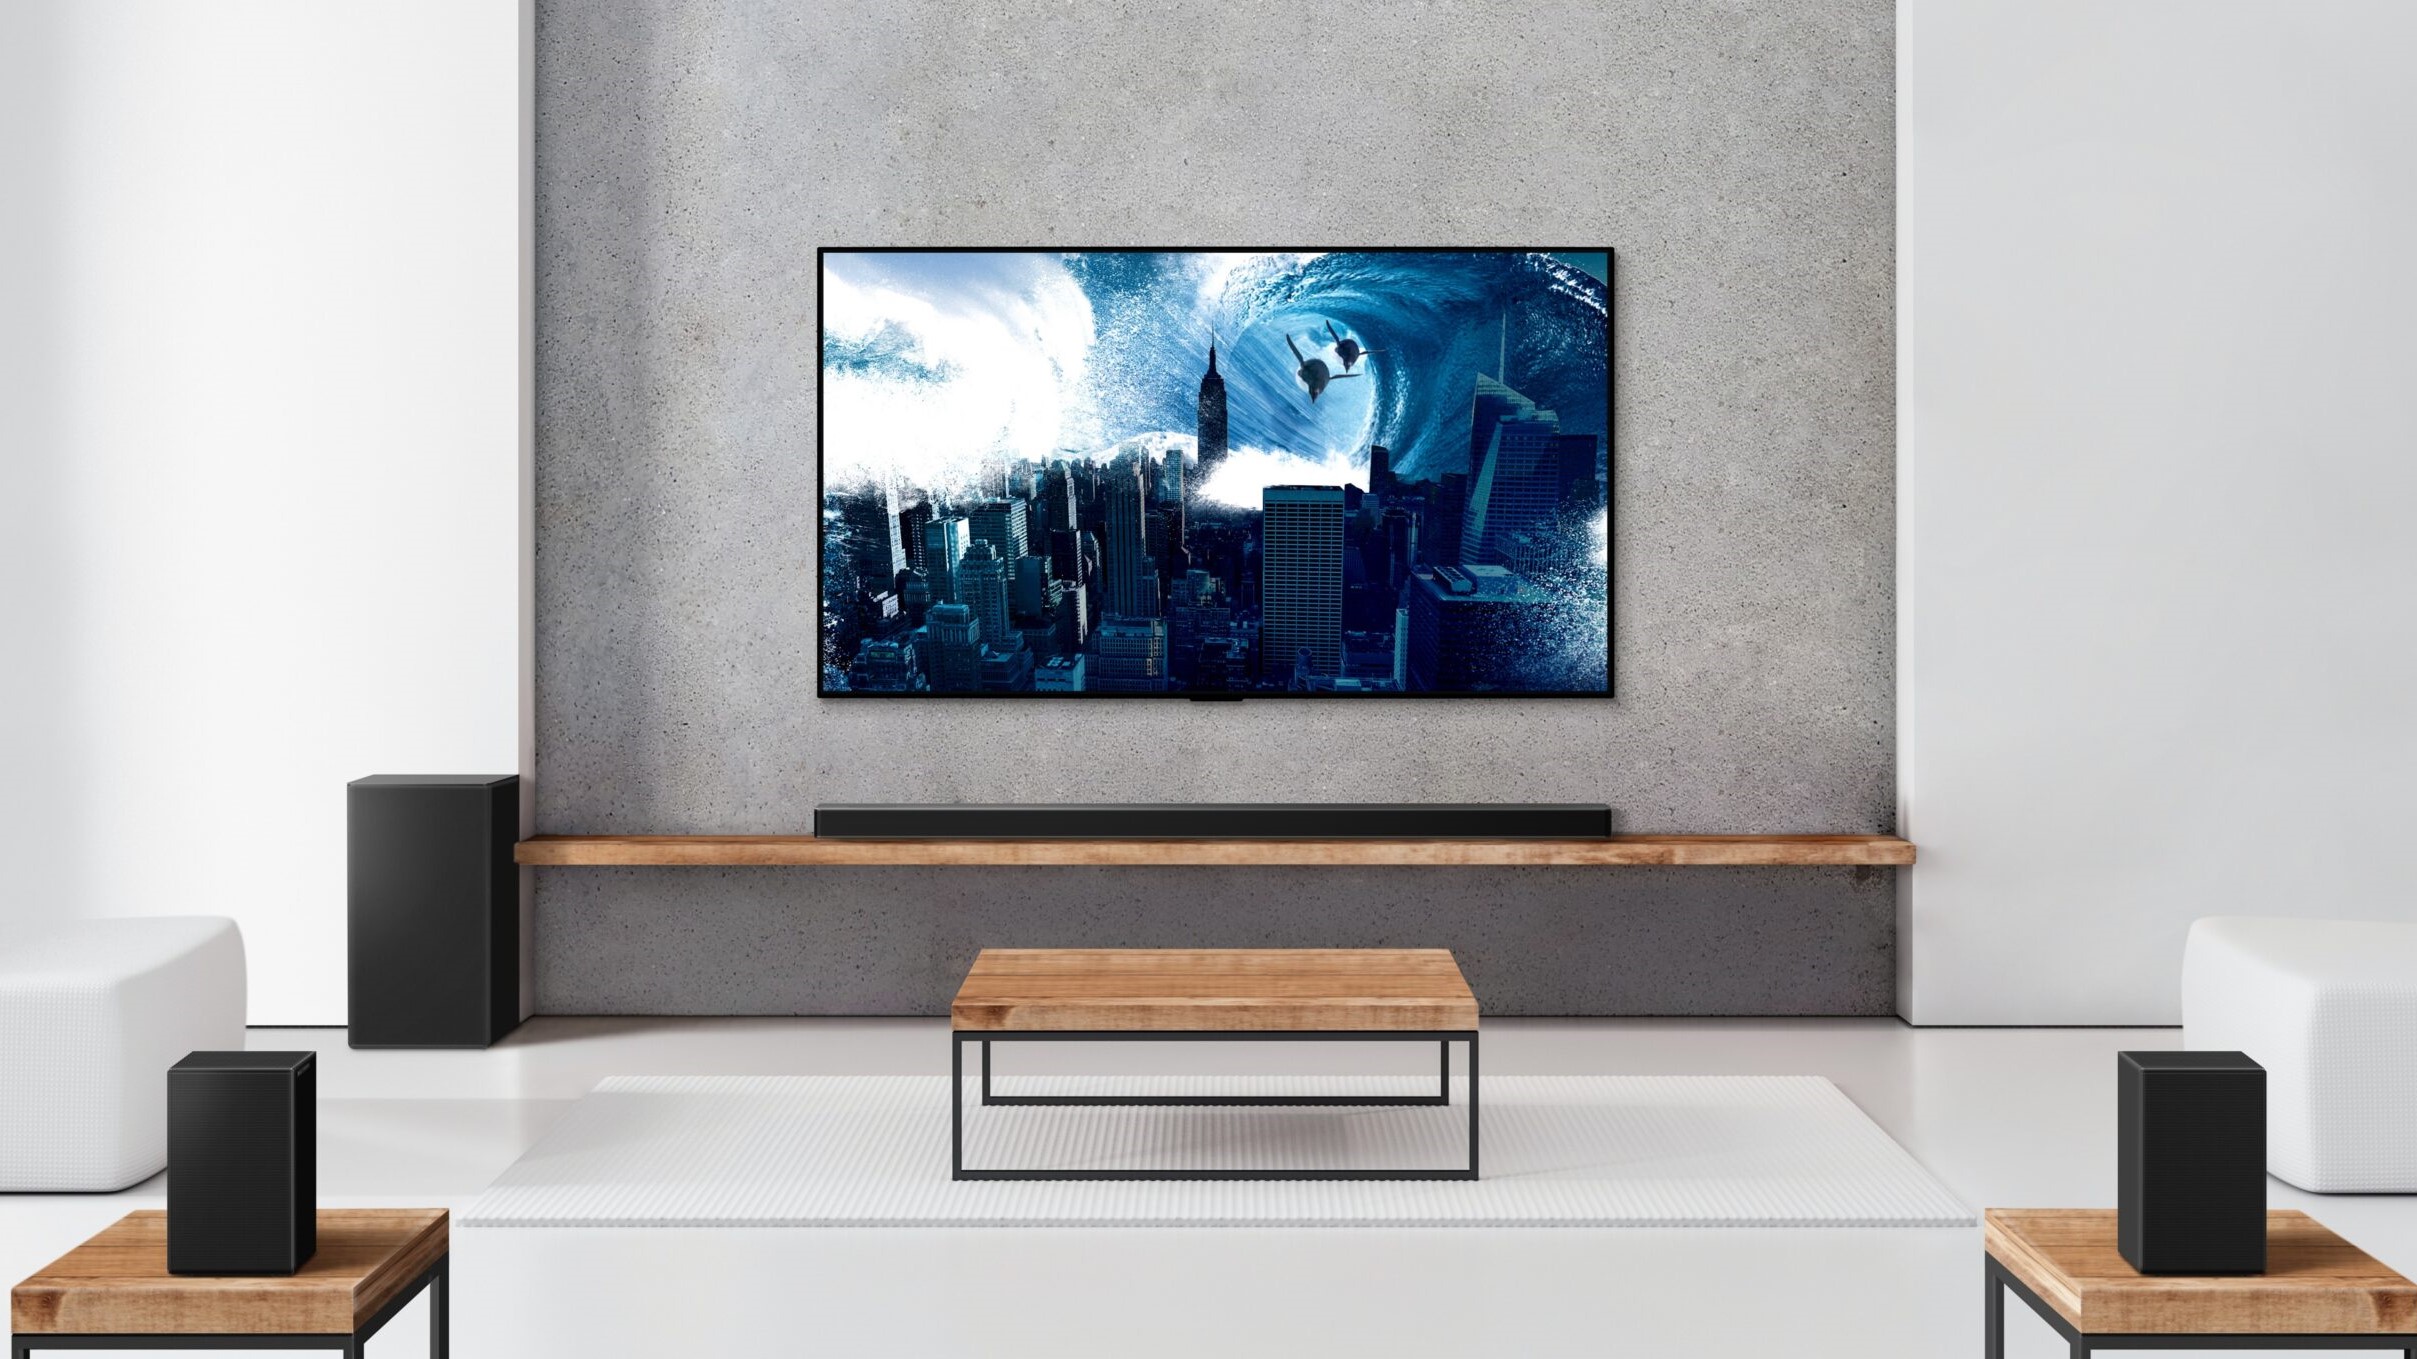 LG's 2021 soundbars will be designed to work best with LG TVs | What Hi-Fi?